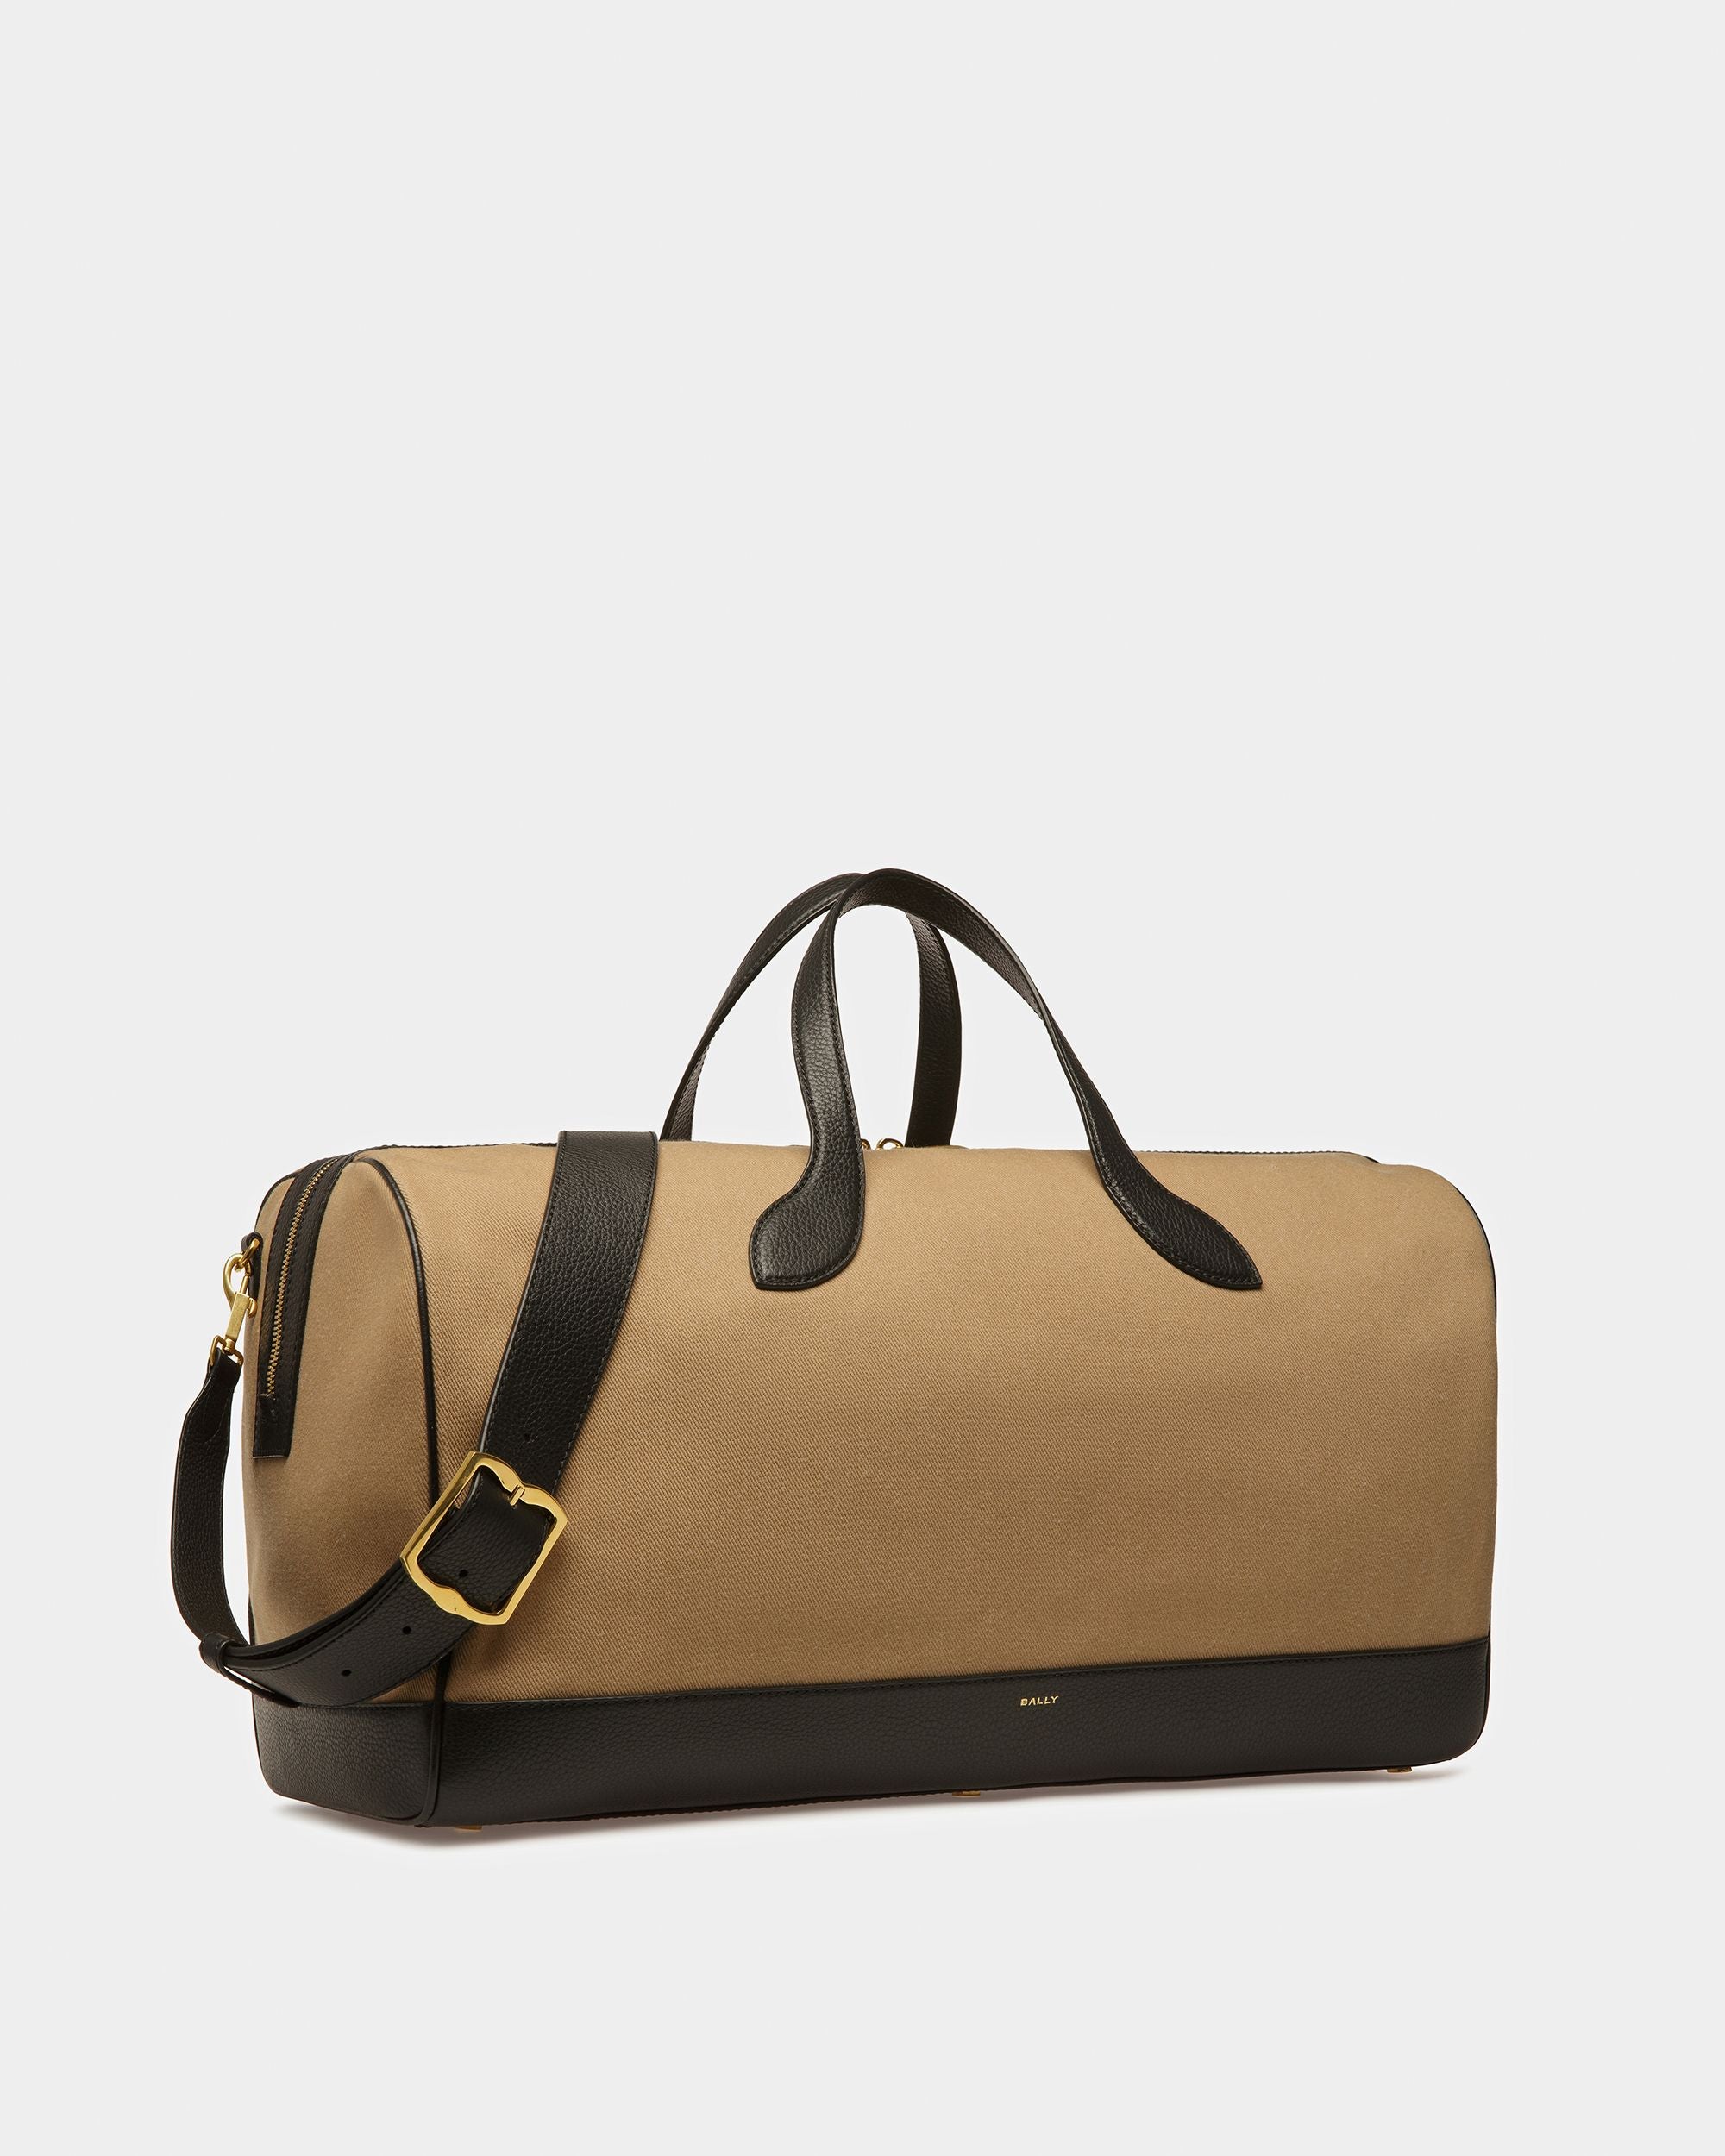 36 Hours | Men's Travel Bag | Sand And Black Fabric And Leather | Bally | Still Life 3/4 Front